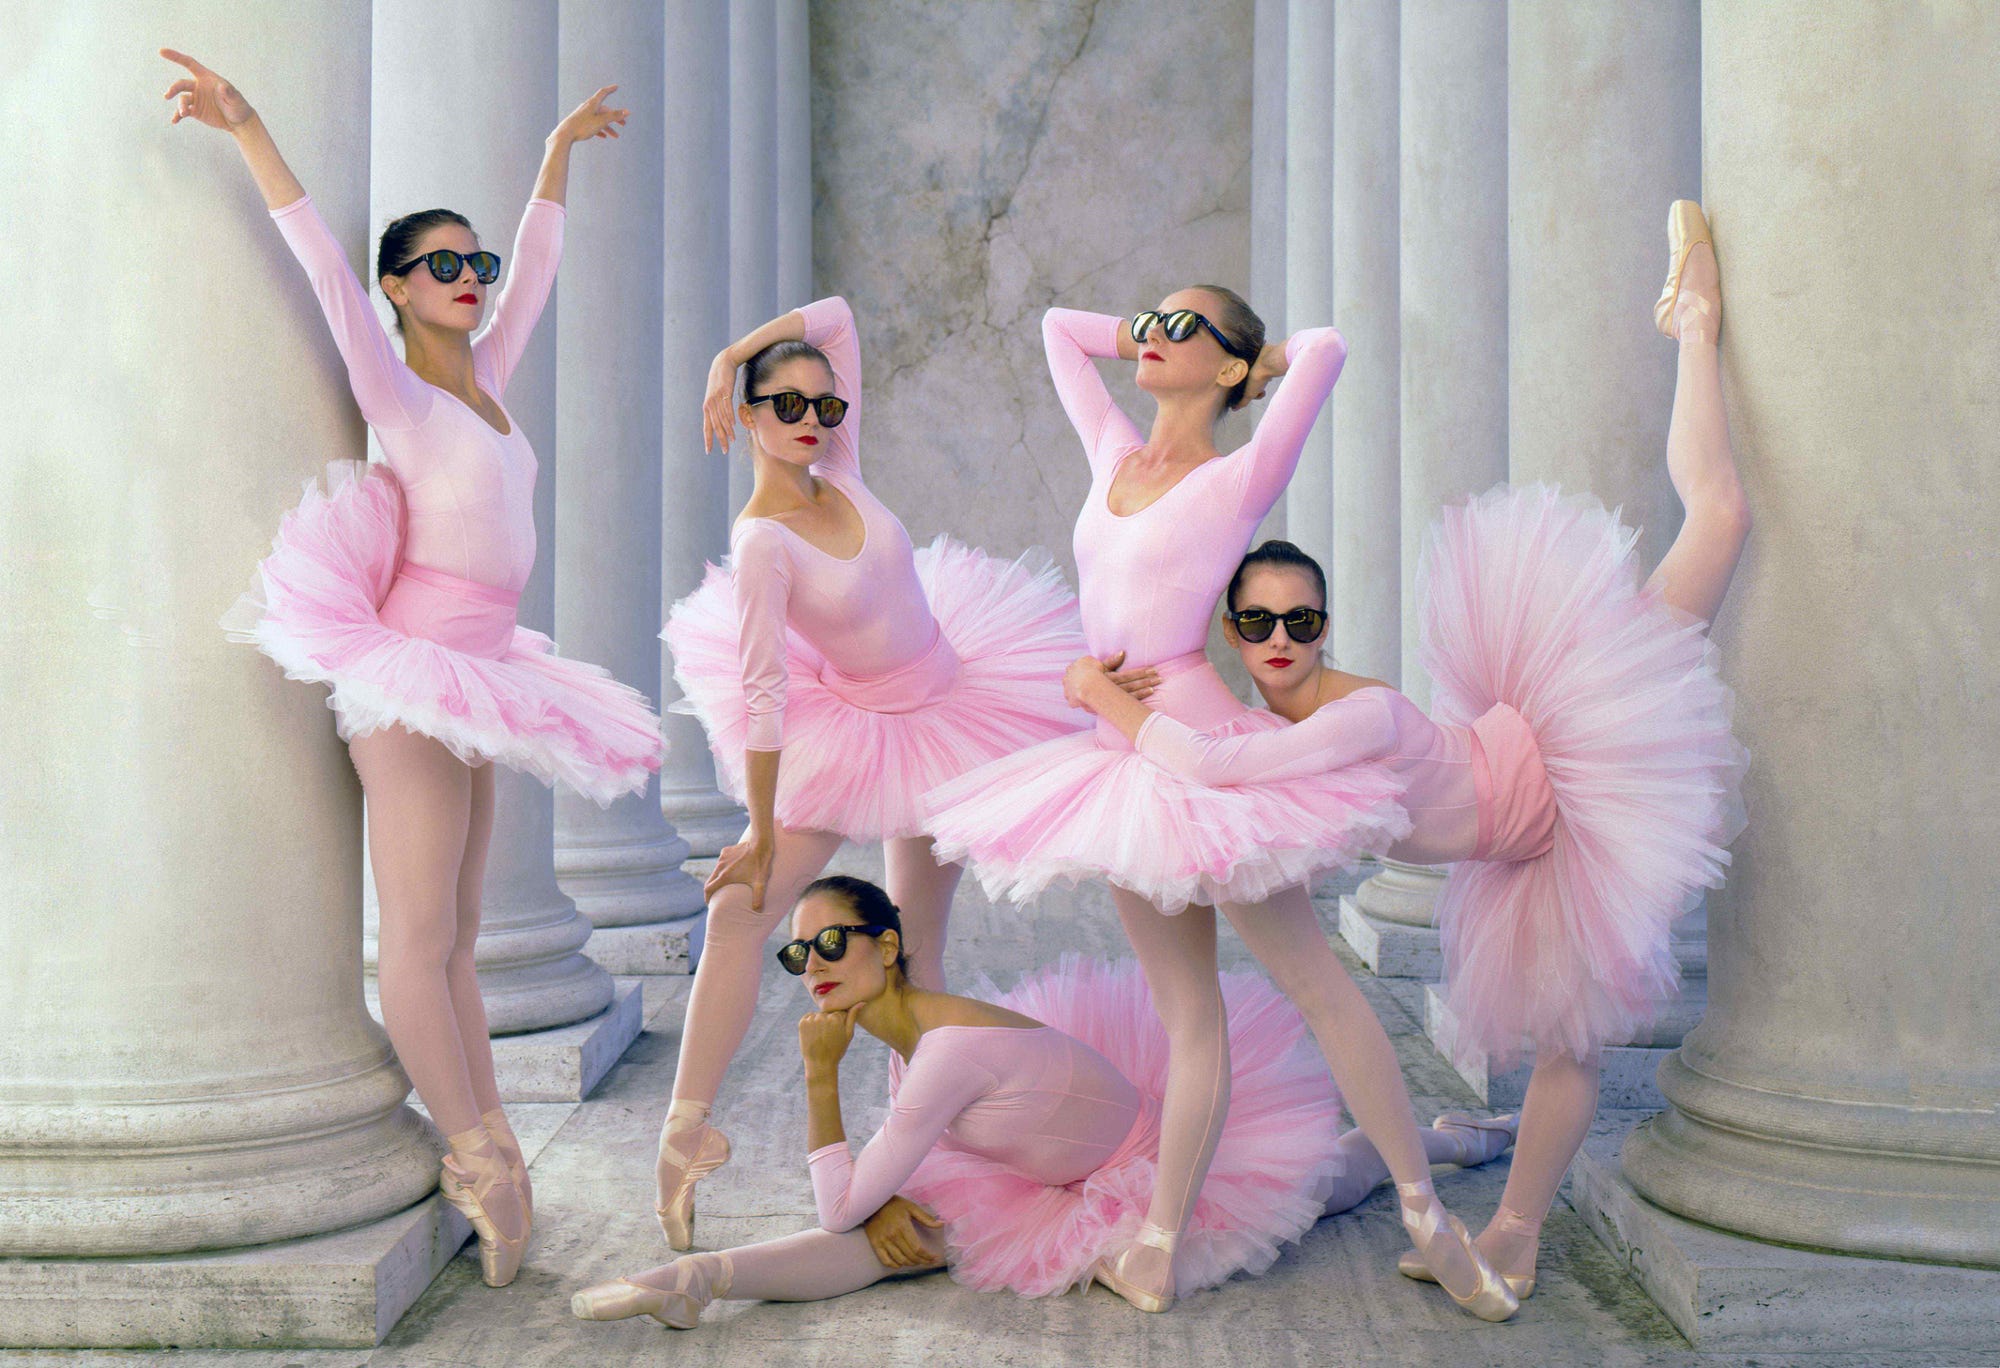 Tale of the Hot Pink Tutu. Dancers of the San Francisco Ballet, by Tom  Zimberoff